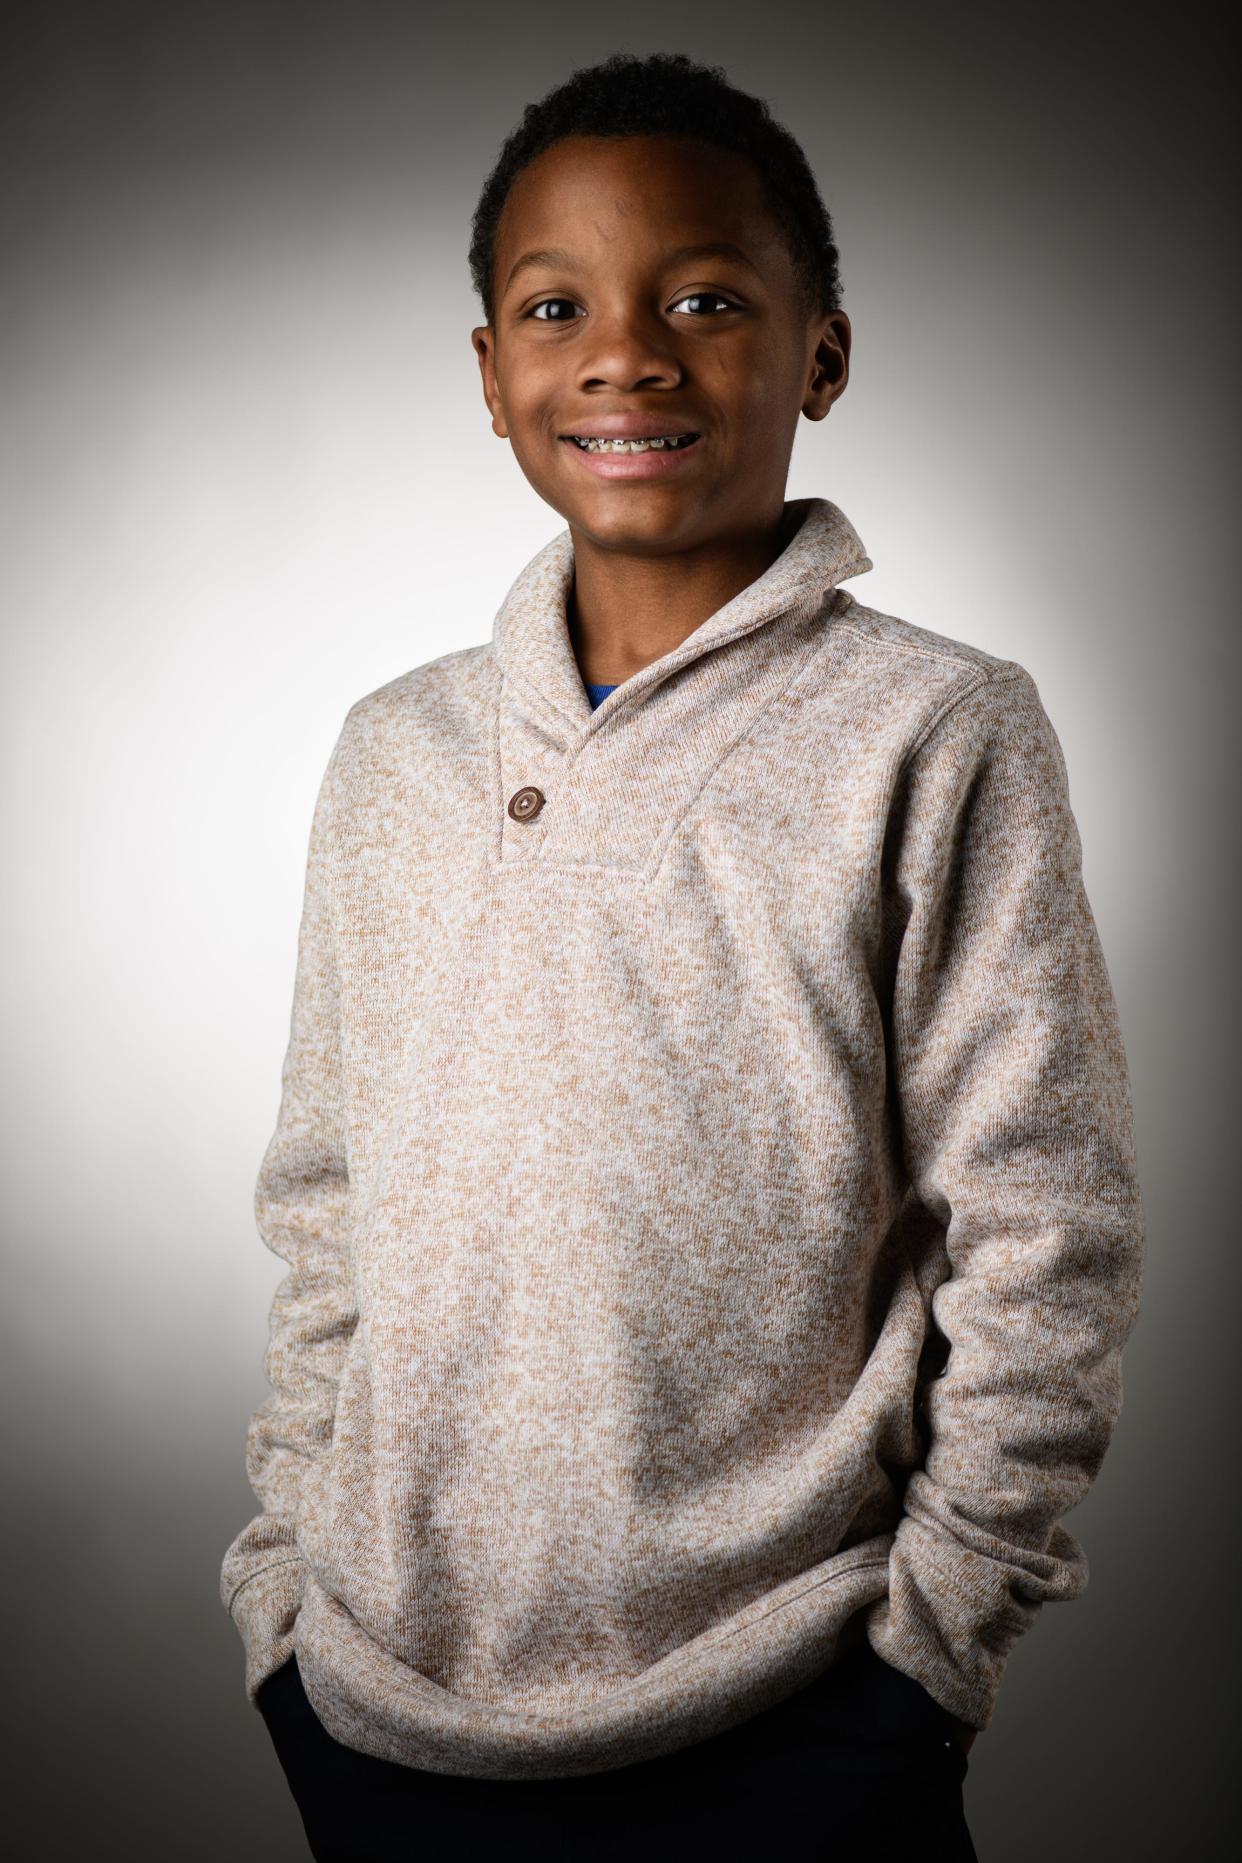 Future Black History Maker: Lawrence Smalls III, 9, attends William H. Owen Elementary and wants to be a helicopter pilot when he grows up.